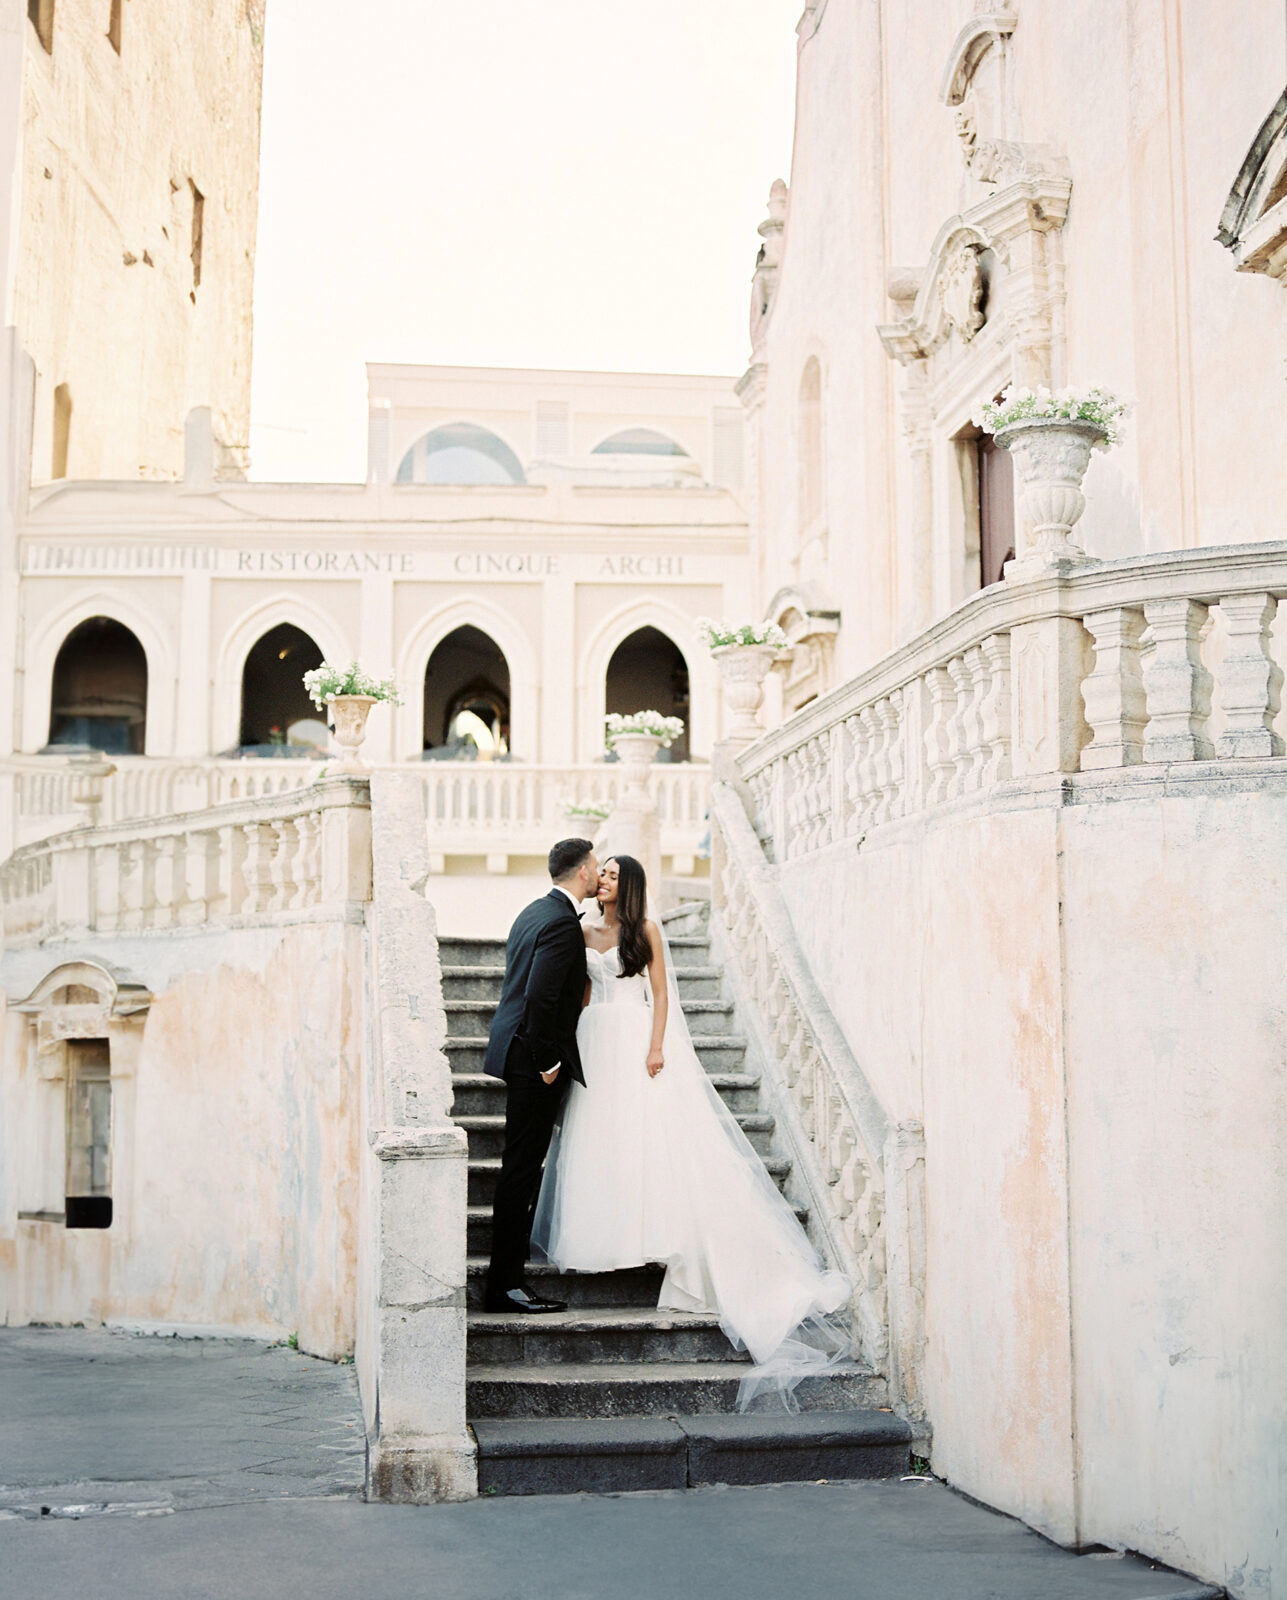 Bride and groom sharing a kiss on a historic staircase at the piazza in Taormina, Sicily.